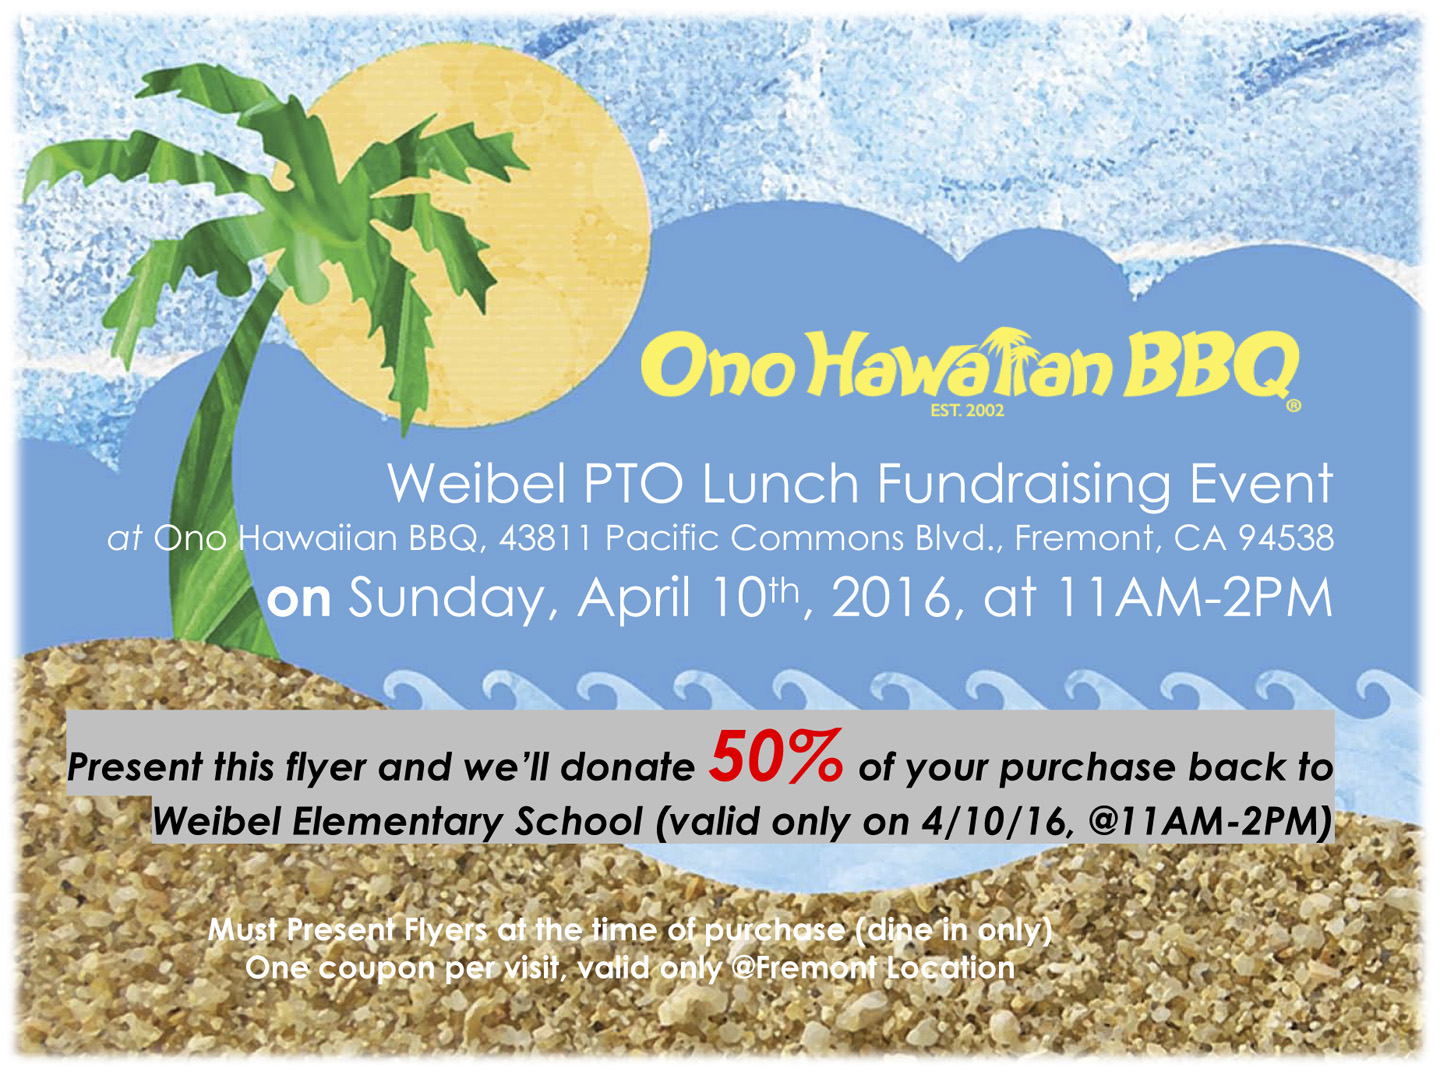 Weibel PTO Lunch Fundraising Event BBQ.jpg